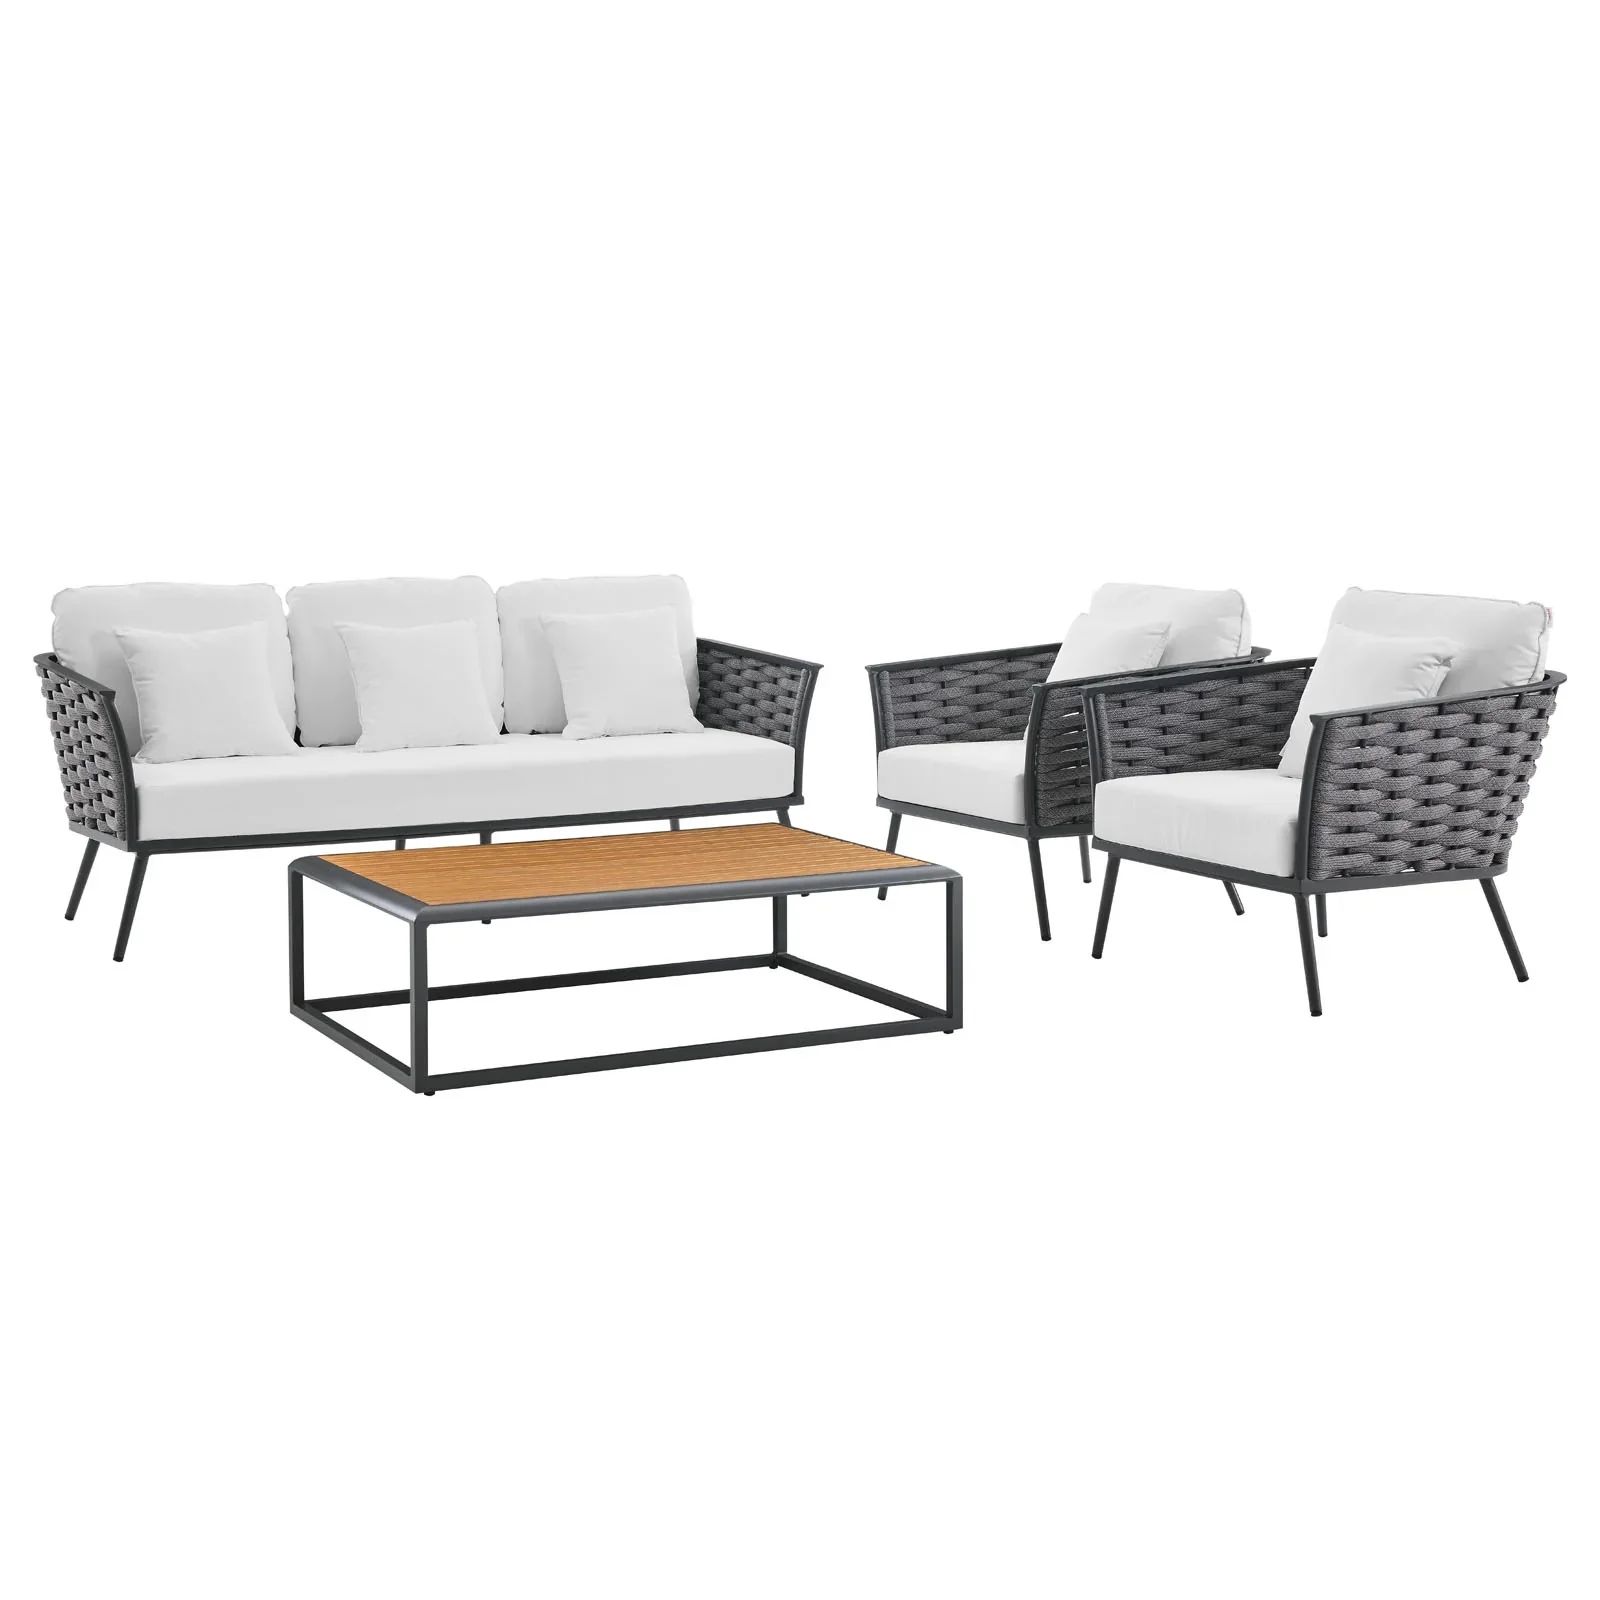 Modway Stance 4 Piece Outdoor Patio Aluminum Sectional Sofa Set in Gray White | Walmart (US)